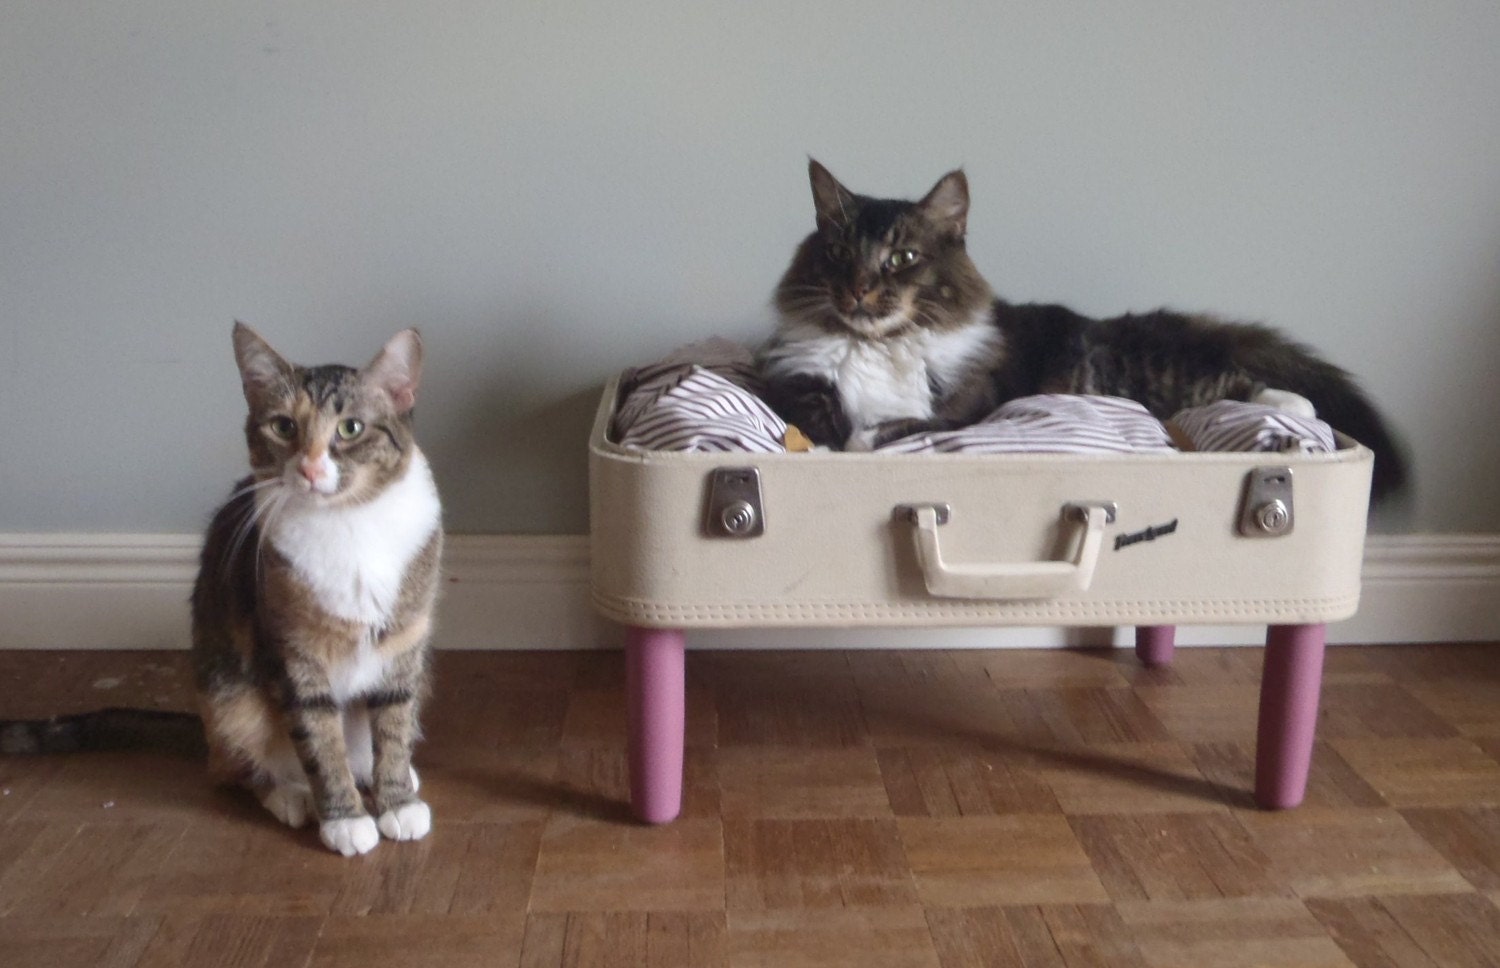 Lovable Luggage Pet Bed - Upcycled Suitcase - White and Pink - 2 dollars goes to carescatshelter